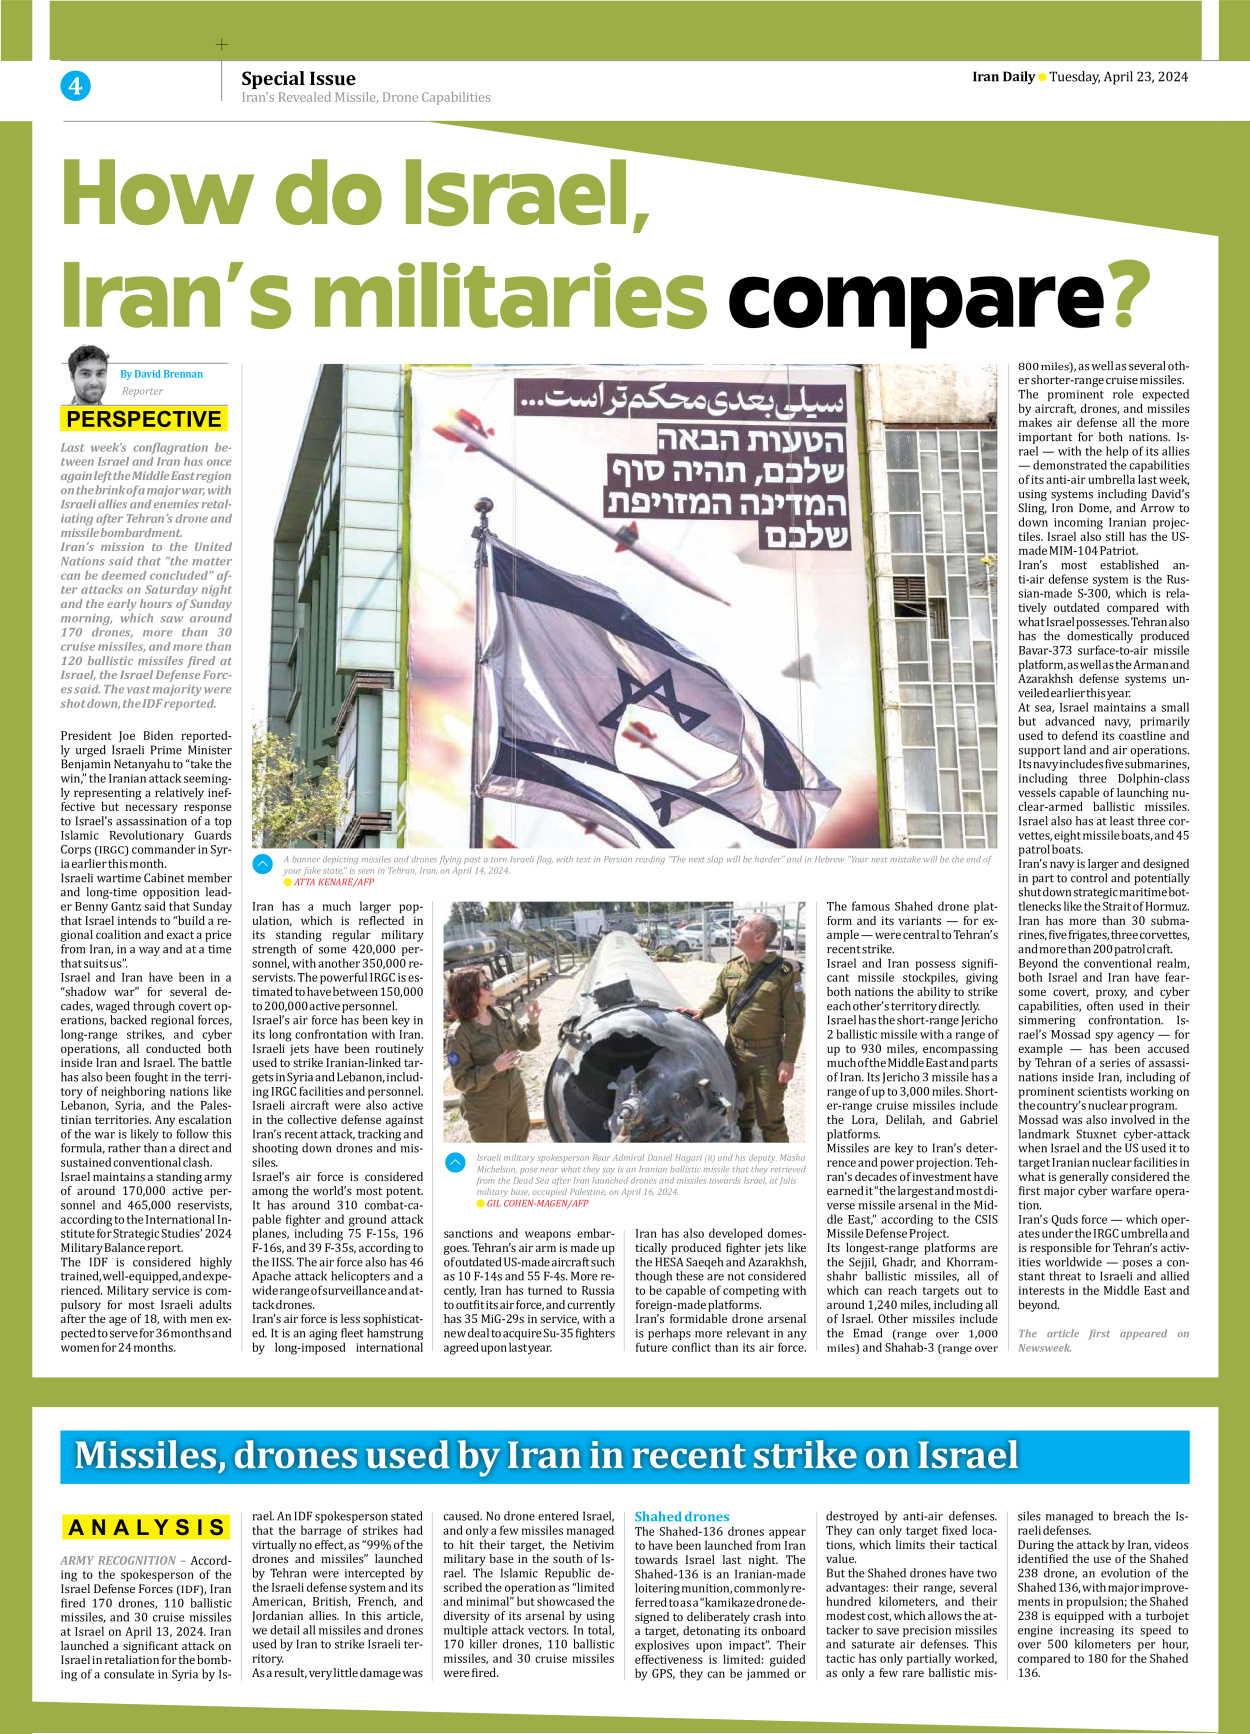 Iran Daily - Number Seven Thousand Five Hundred and Forty - 23 April 2024 - Page 4